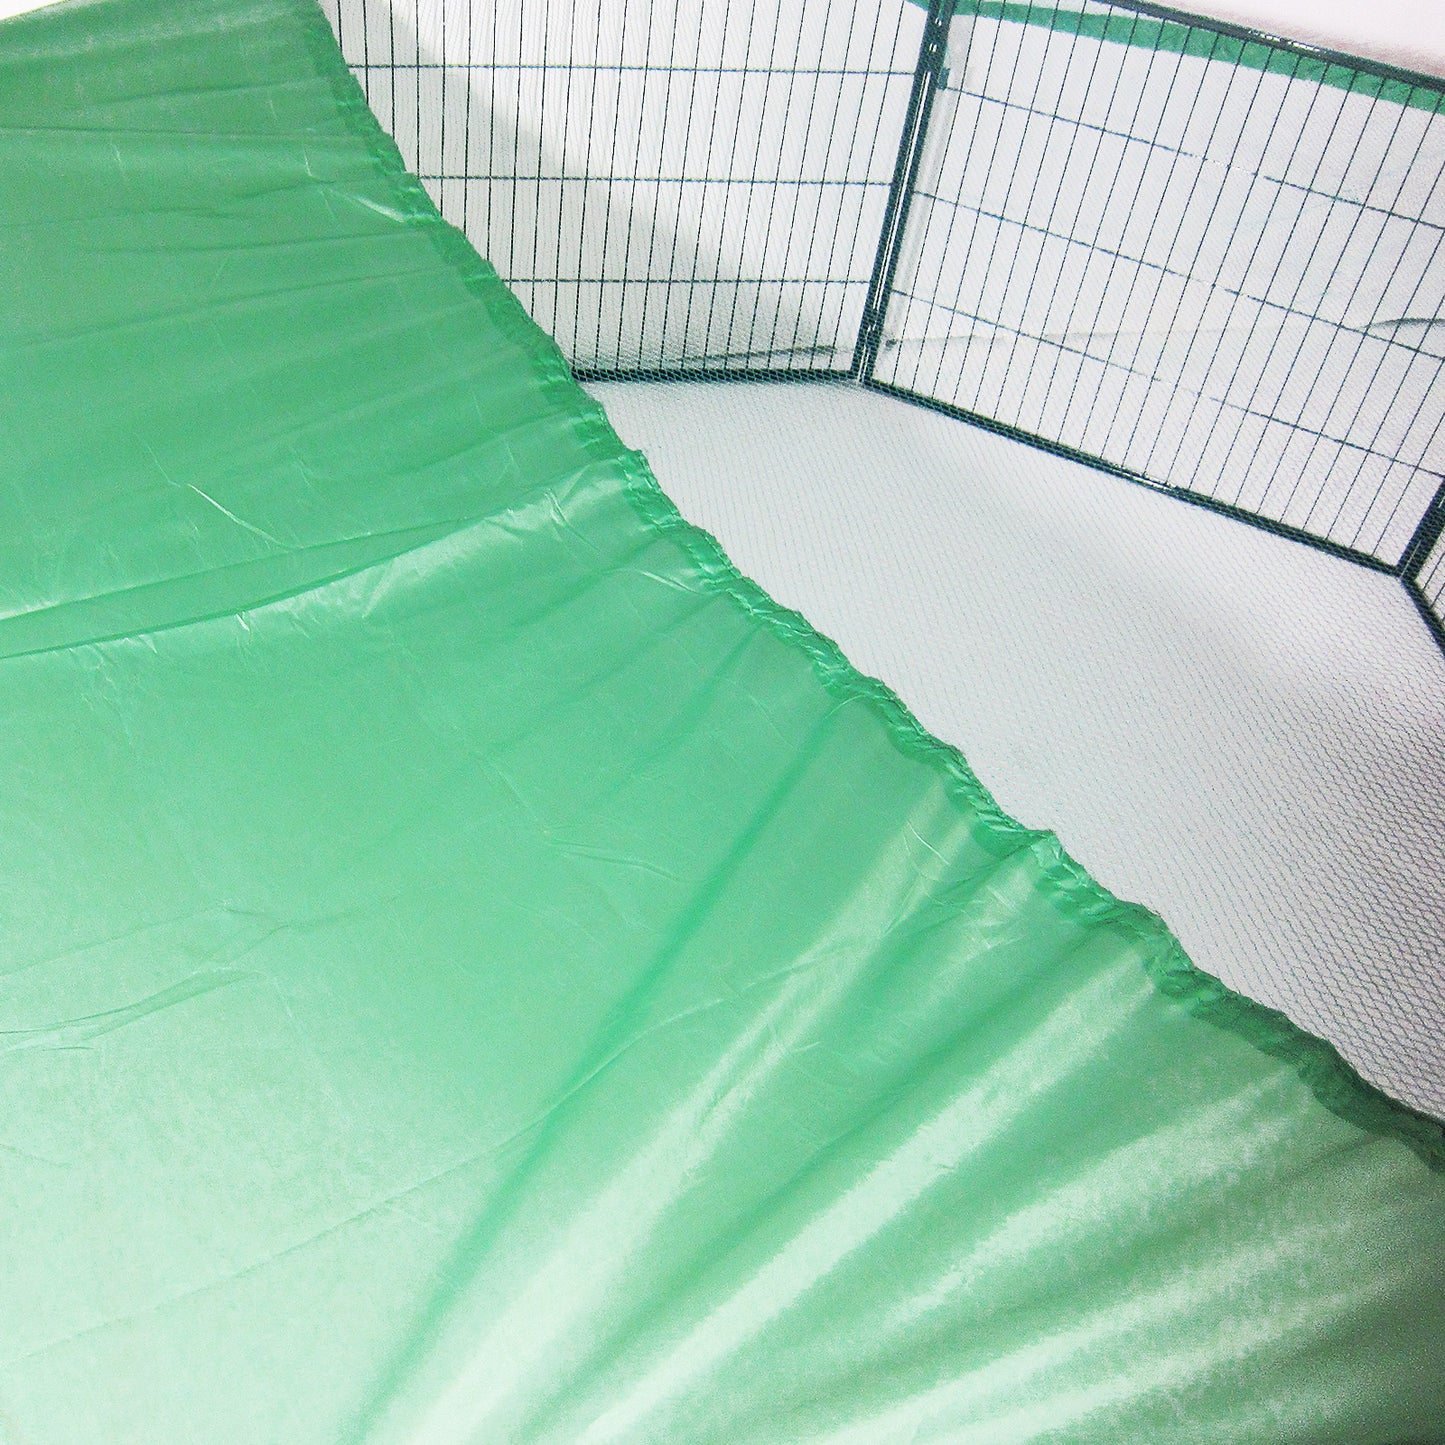 Net Cover Green for Pet Playpen Dog Cage 31in